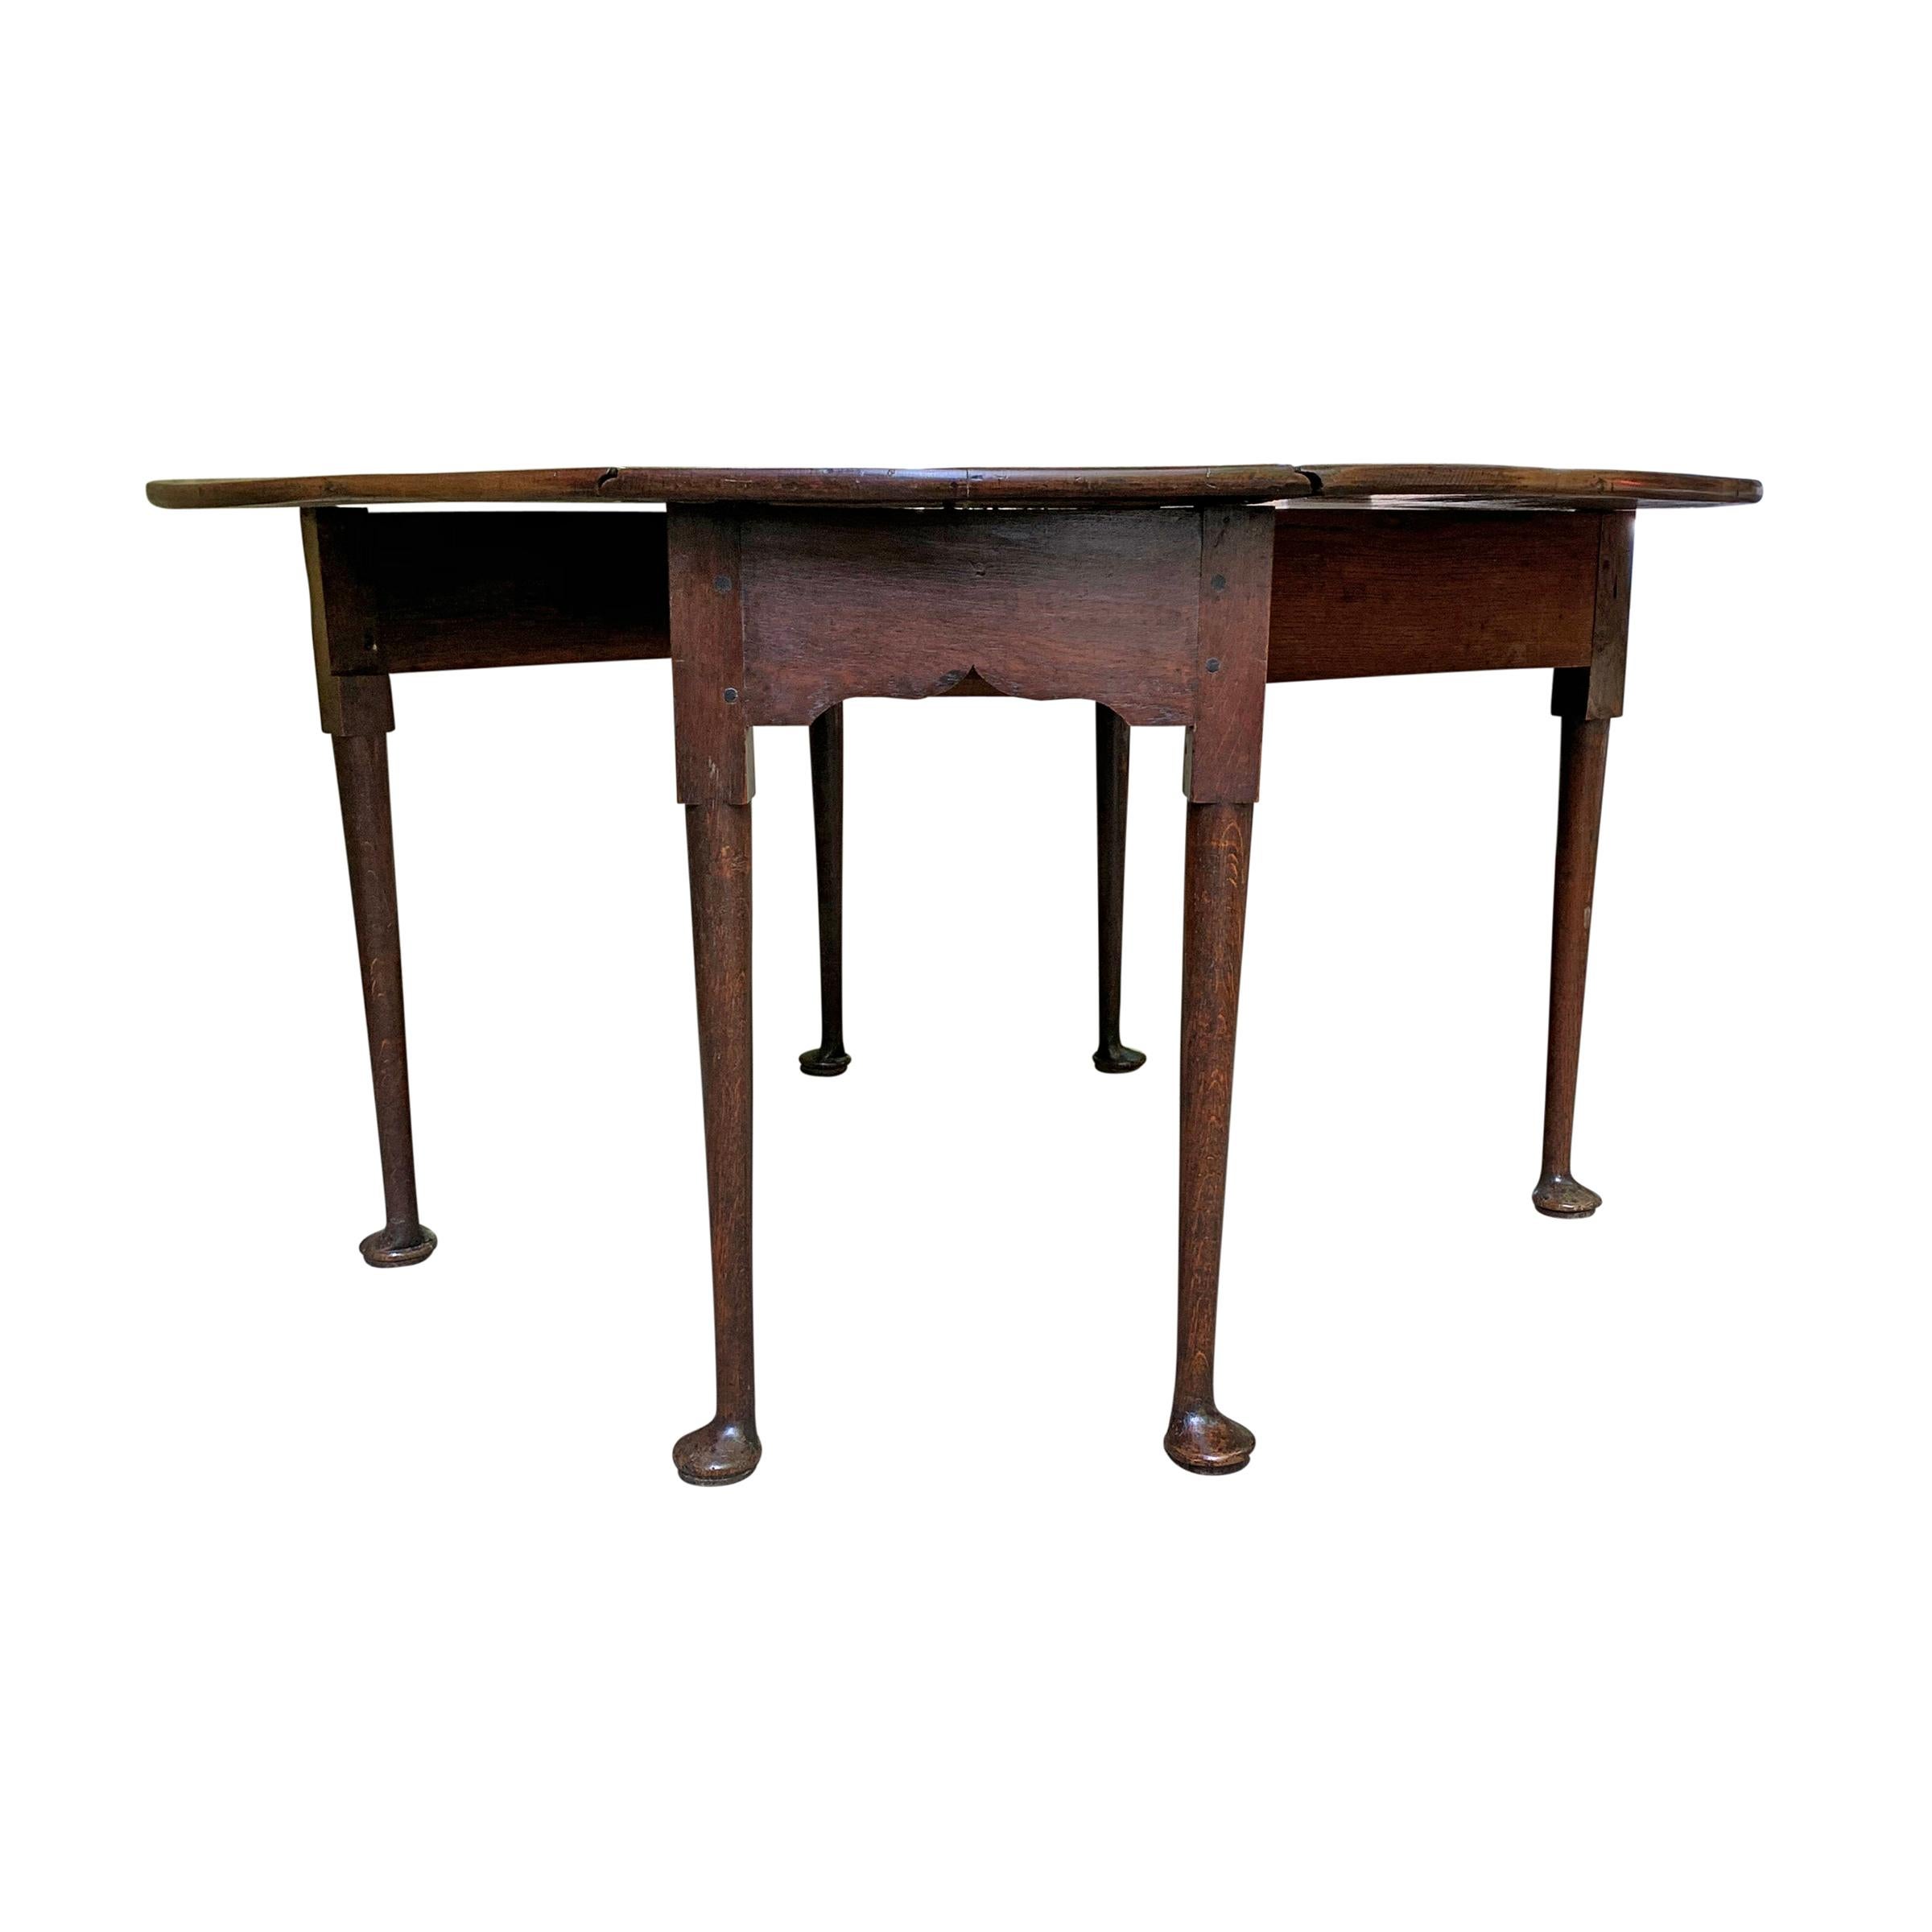 British Early 19th Century English Queen Anne Gate-Leg Table